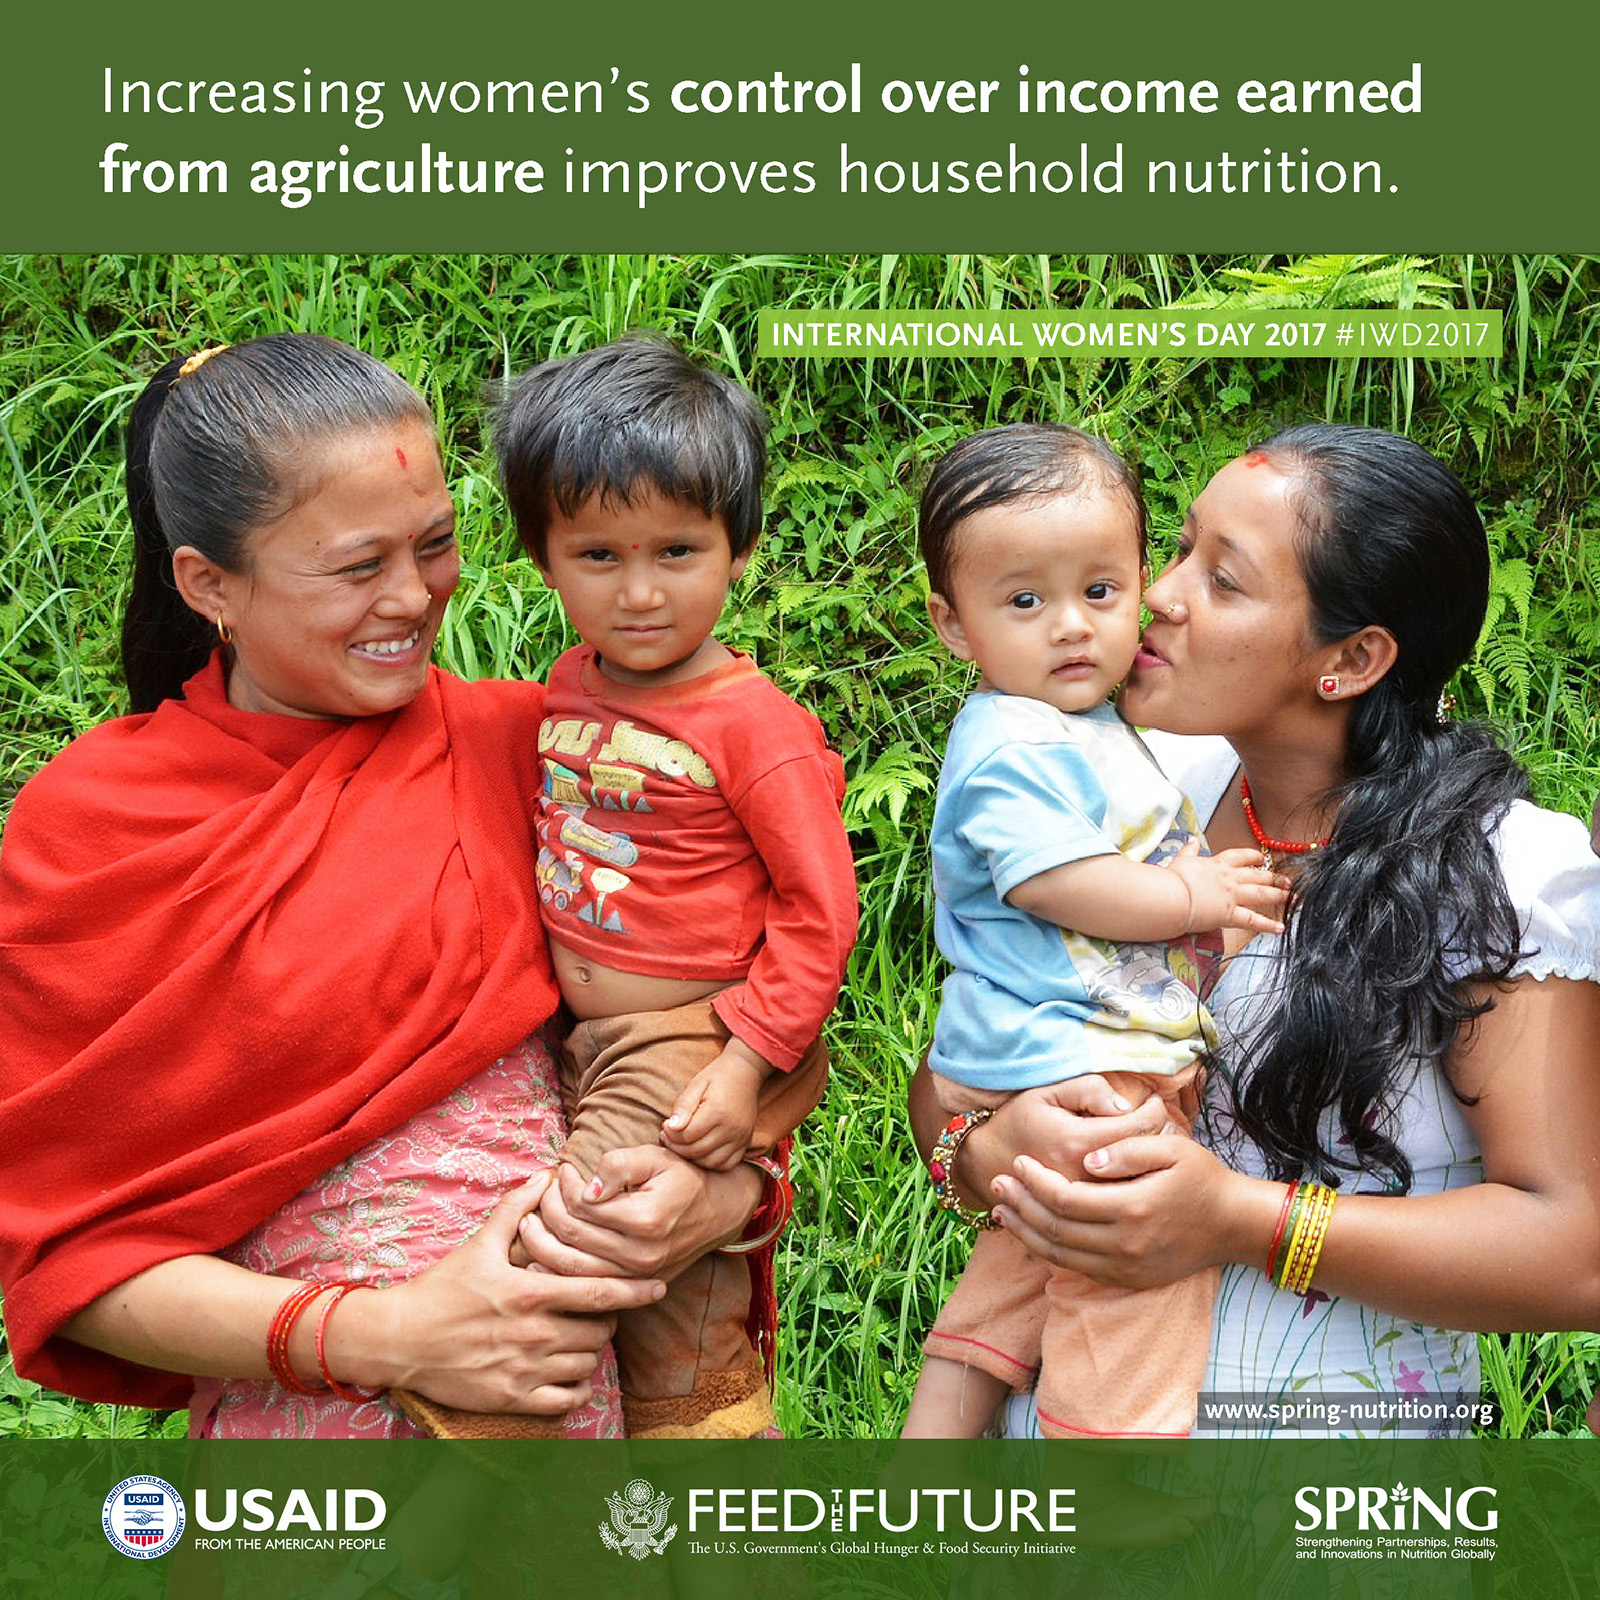 Increasing women's control over income earned from agriculture improves household nutrition.